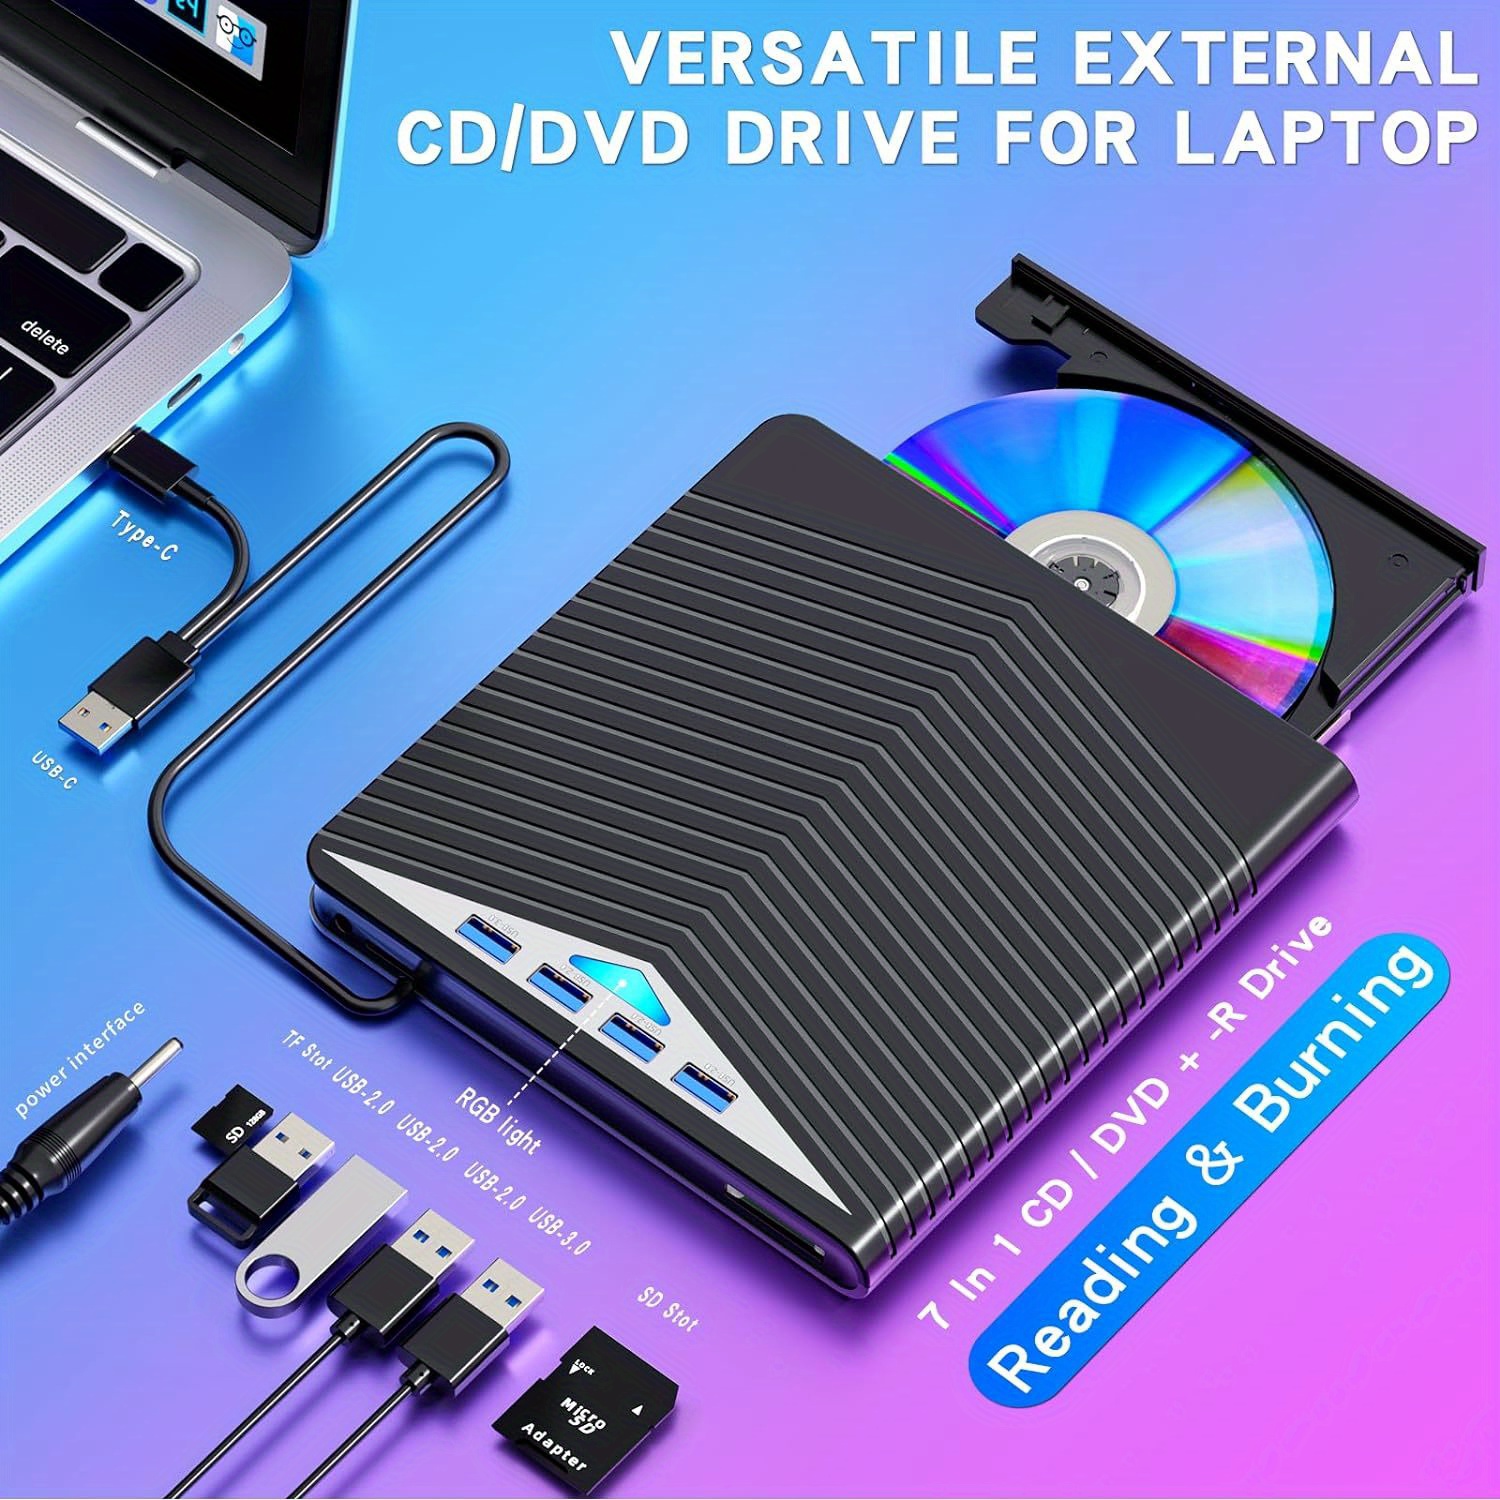 

Multifunctional External Cd Dvd Drive, Usb 3.0 Type-c Cd Dvd +/-rw Optical Drive Cd Burner, Ultra-slim Drive With 4 Usb Ports And Sd/tf Card Slots, Compatible With Linux, Windows,